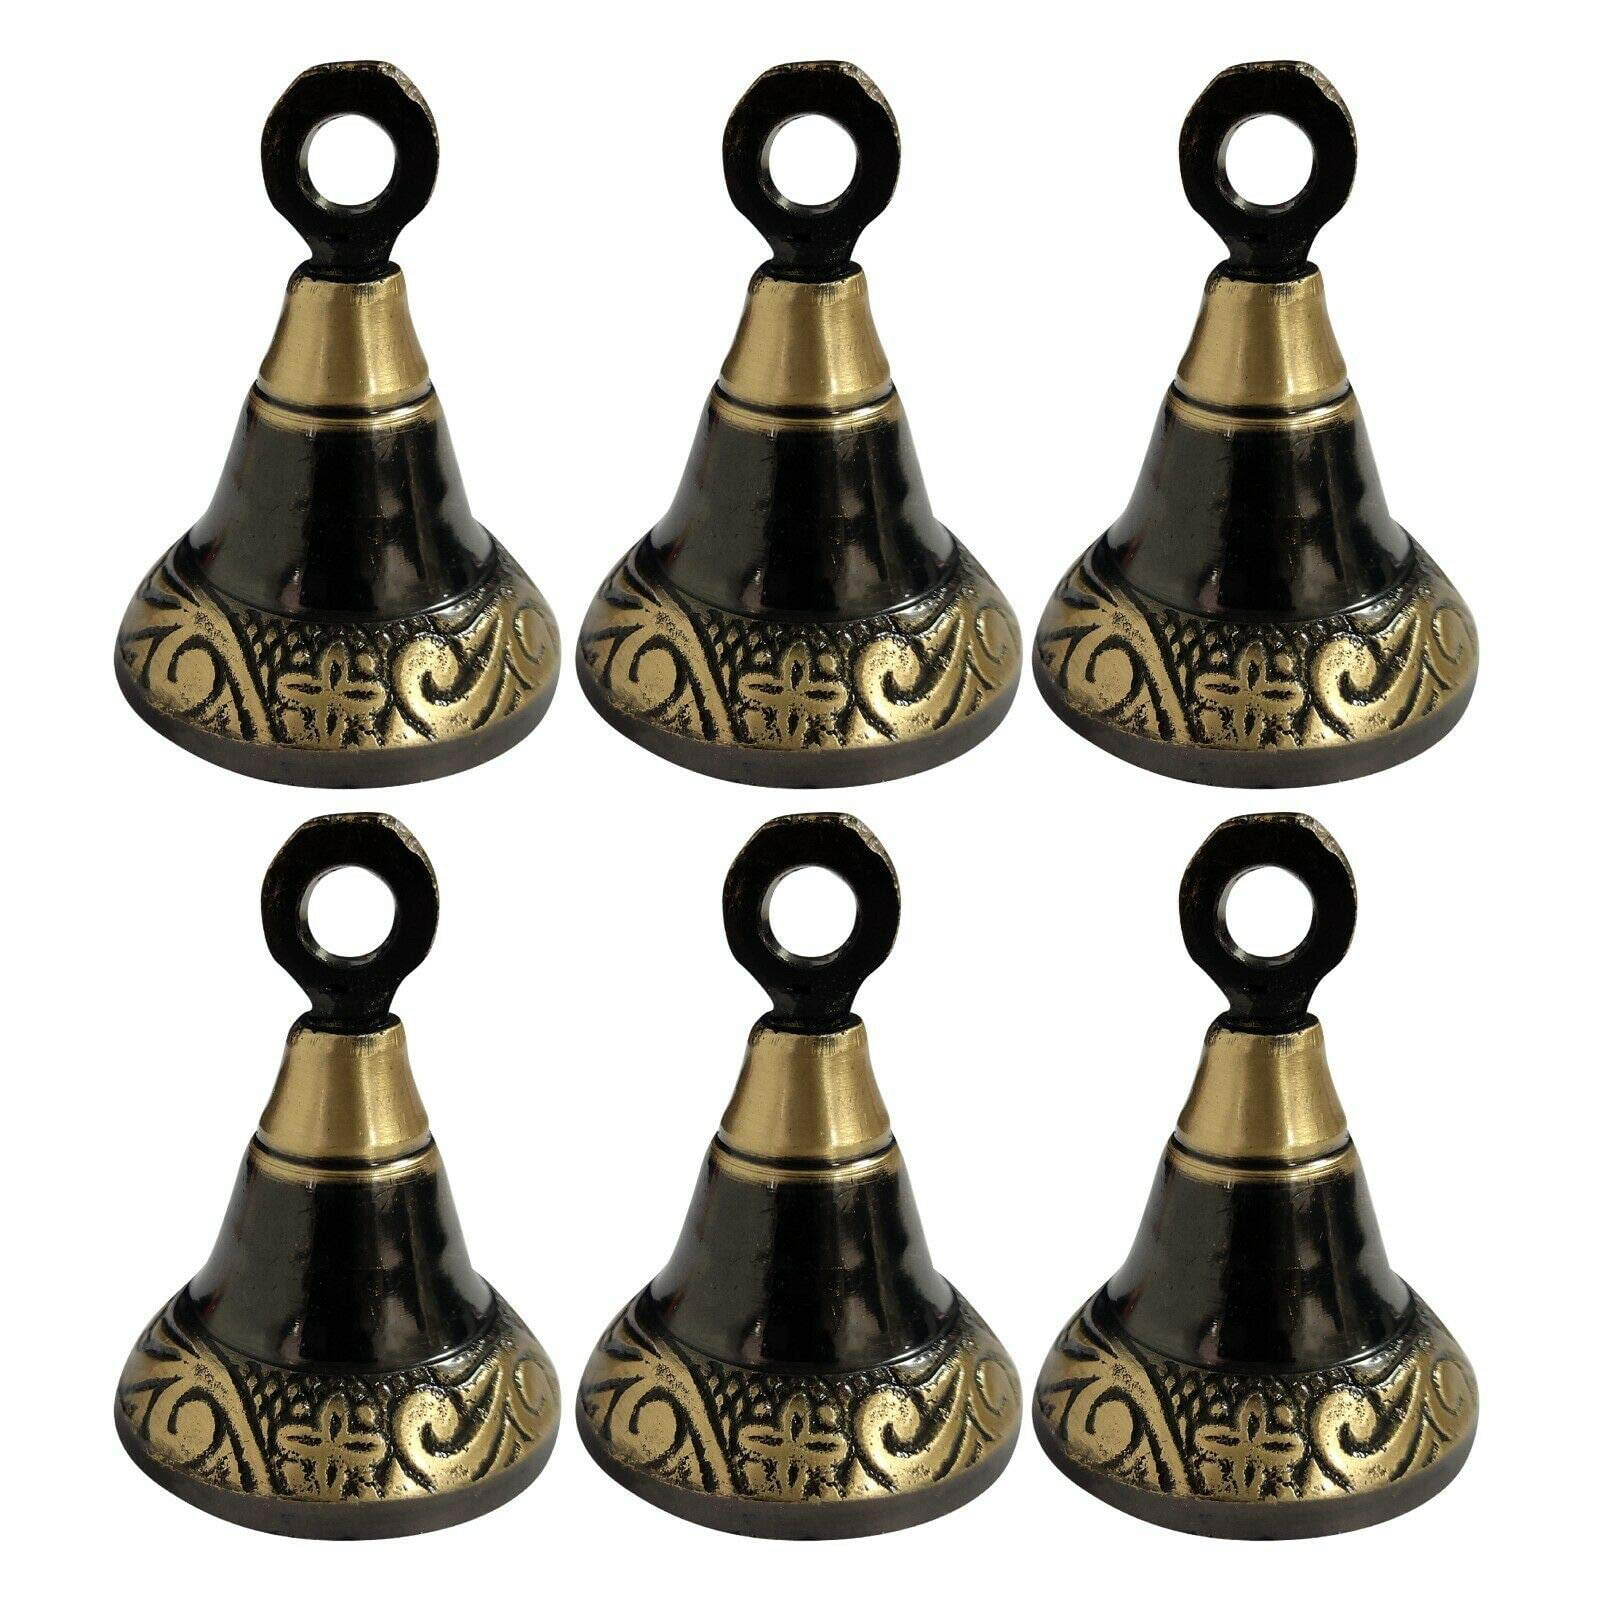 Decorative Jingle Bells Making Wind Chimes Christmas Hanging Bell Gift Set of 12